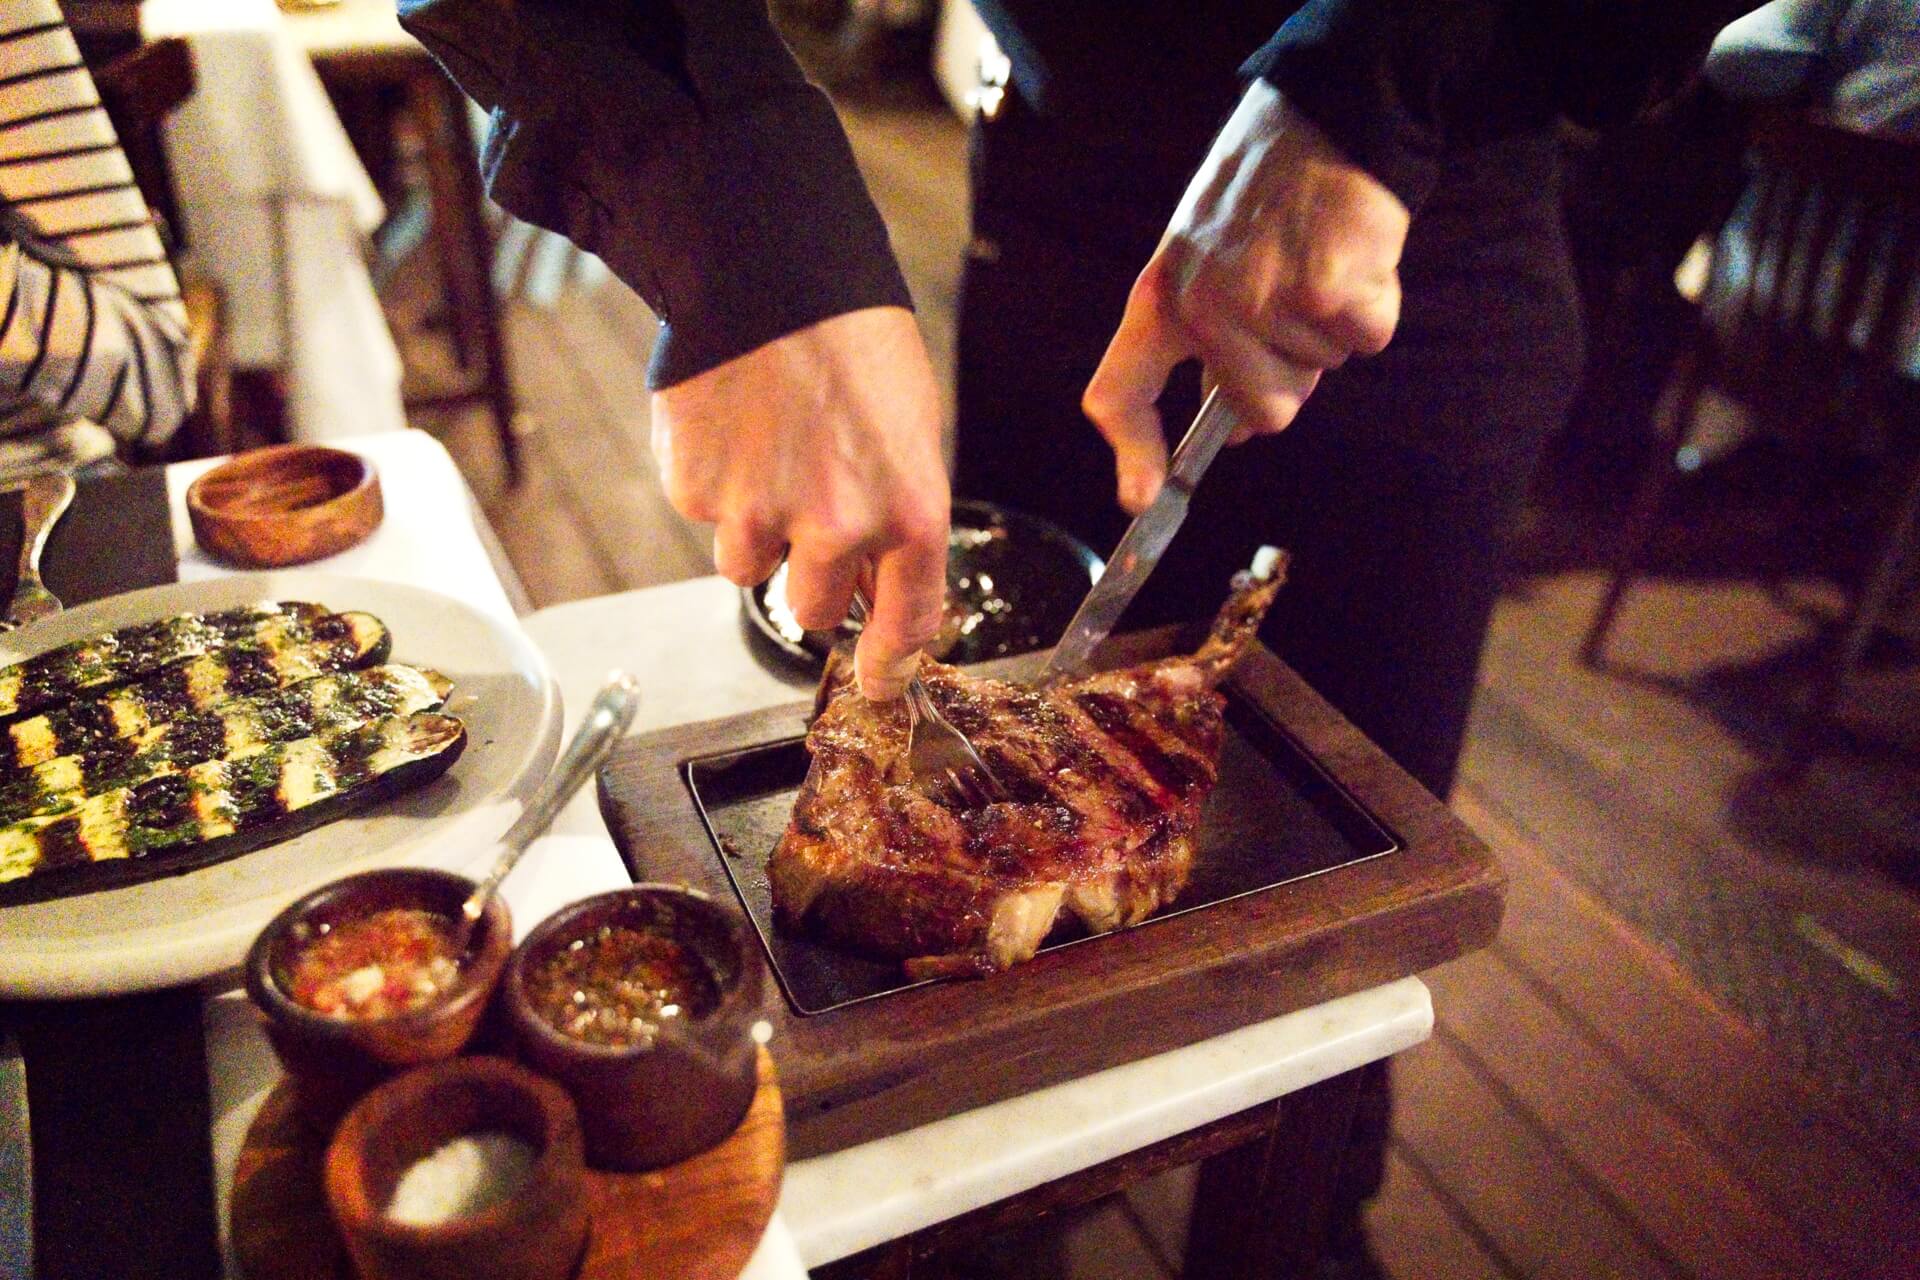 Slicing a steak at don julio buenos aires